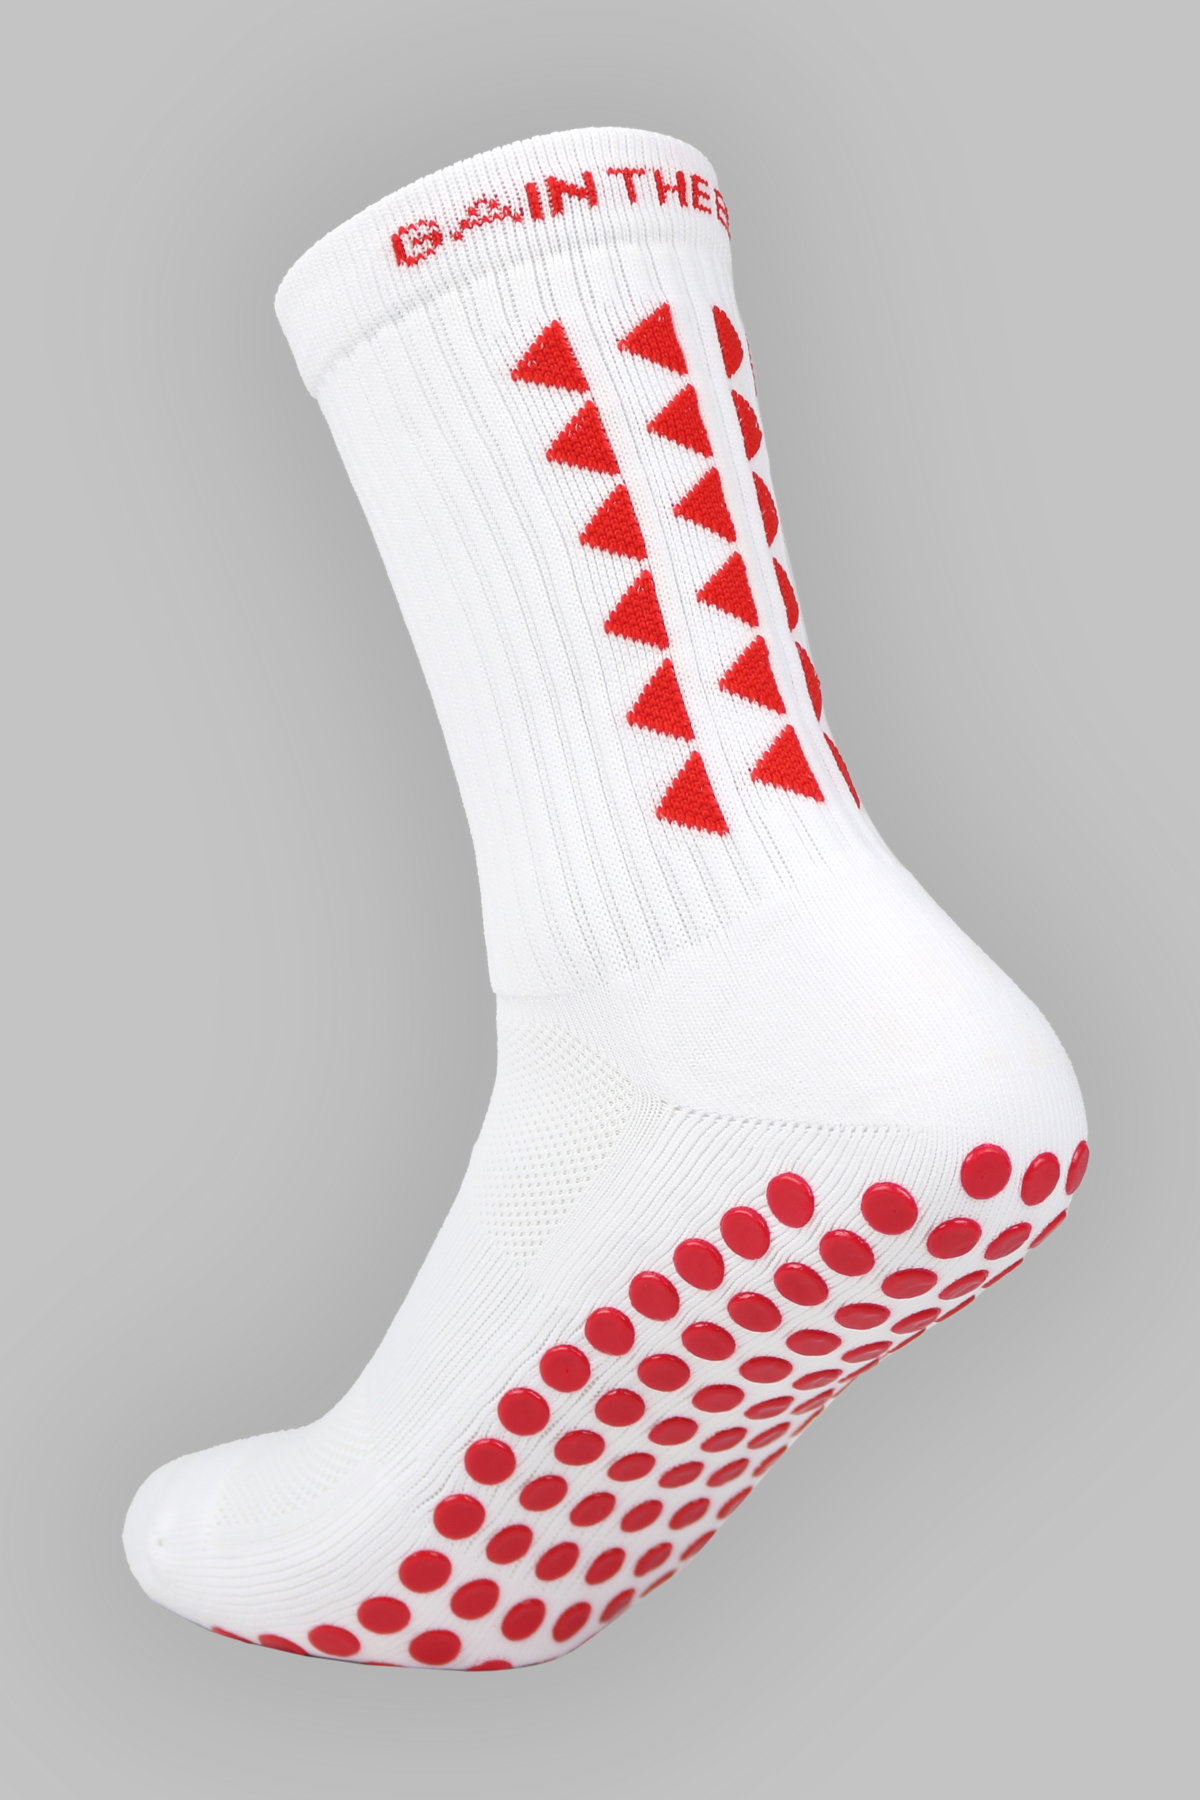 LIMITED EDITION GRIP SOCKS 2.0 - White & Red